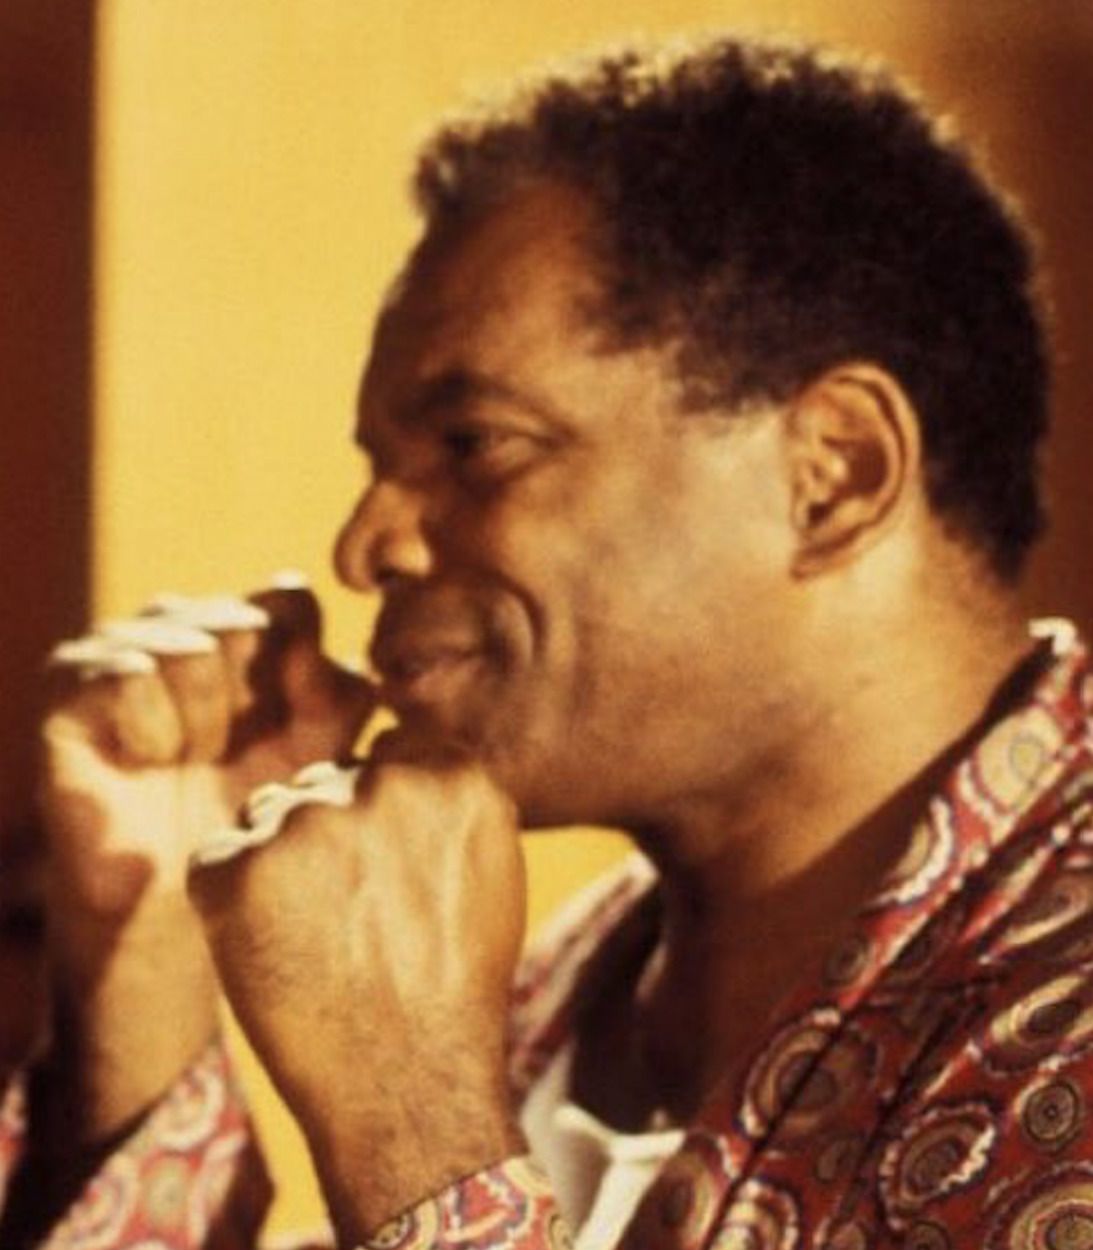 John Witherspoon in Friday